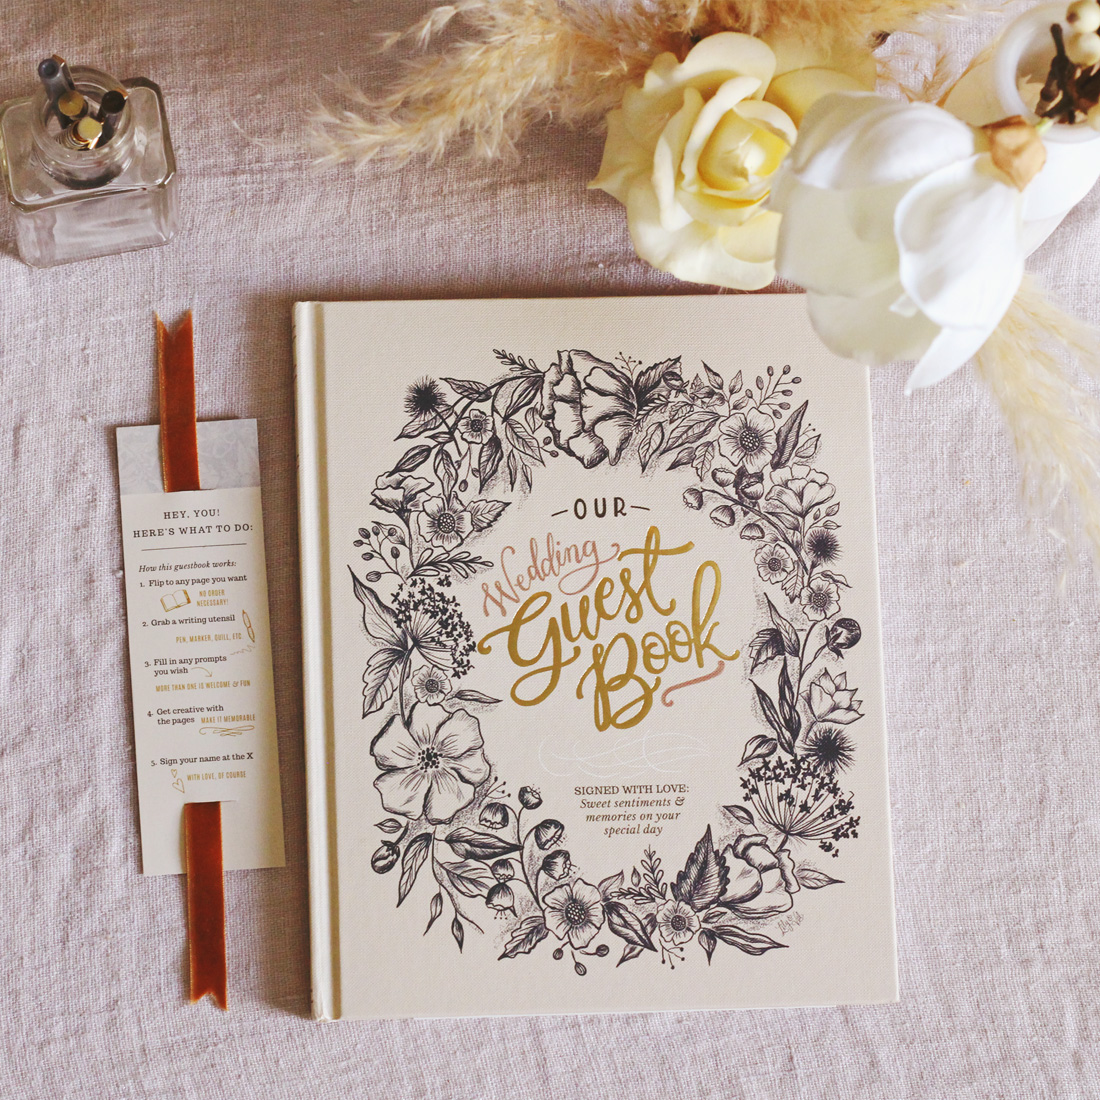 The Lily & Val Wedding Guestbook is an interactive, sentimental take on the traditional wedding guestbook featuring heartfelt prompts for your guests to fill out